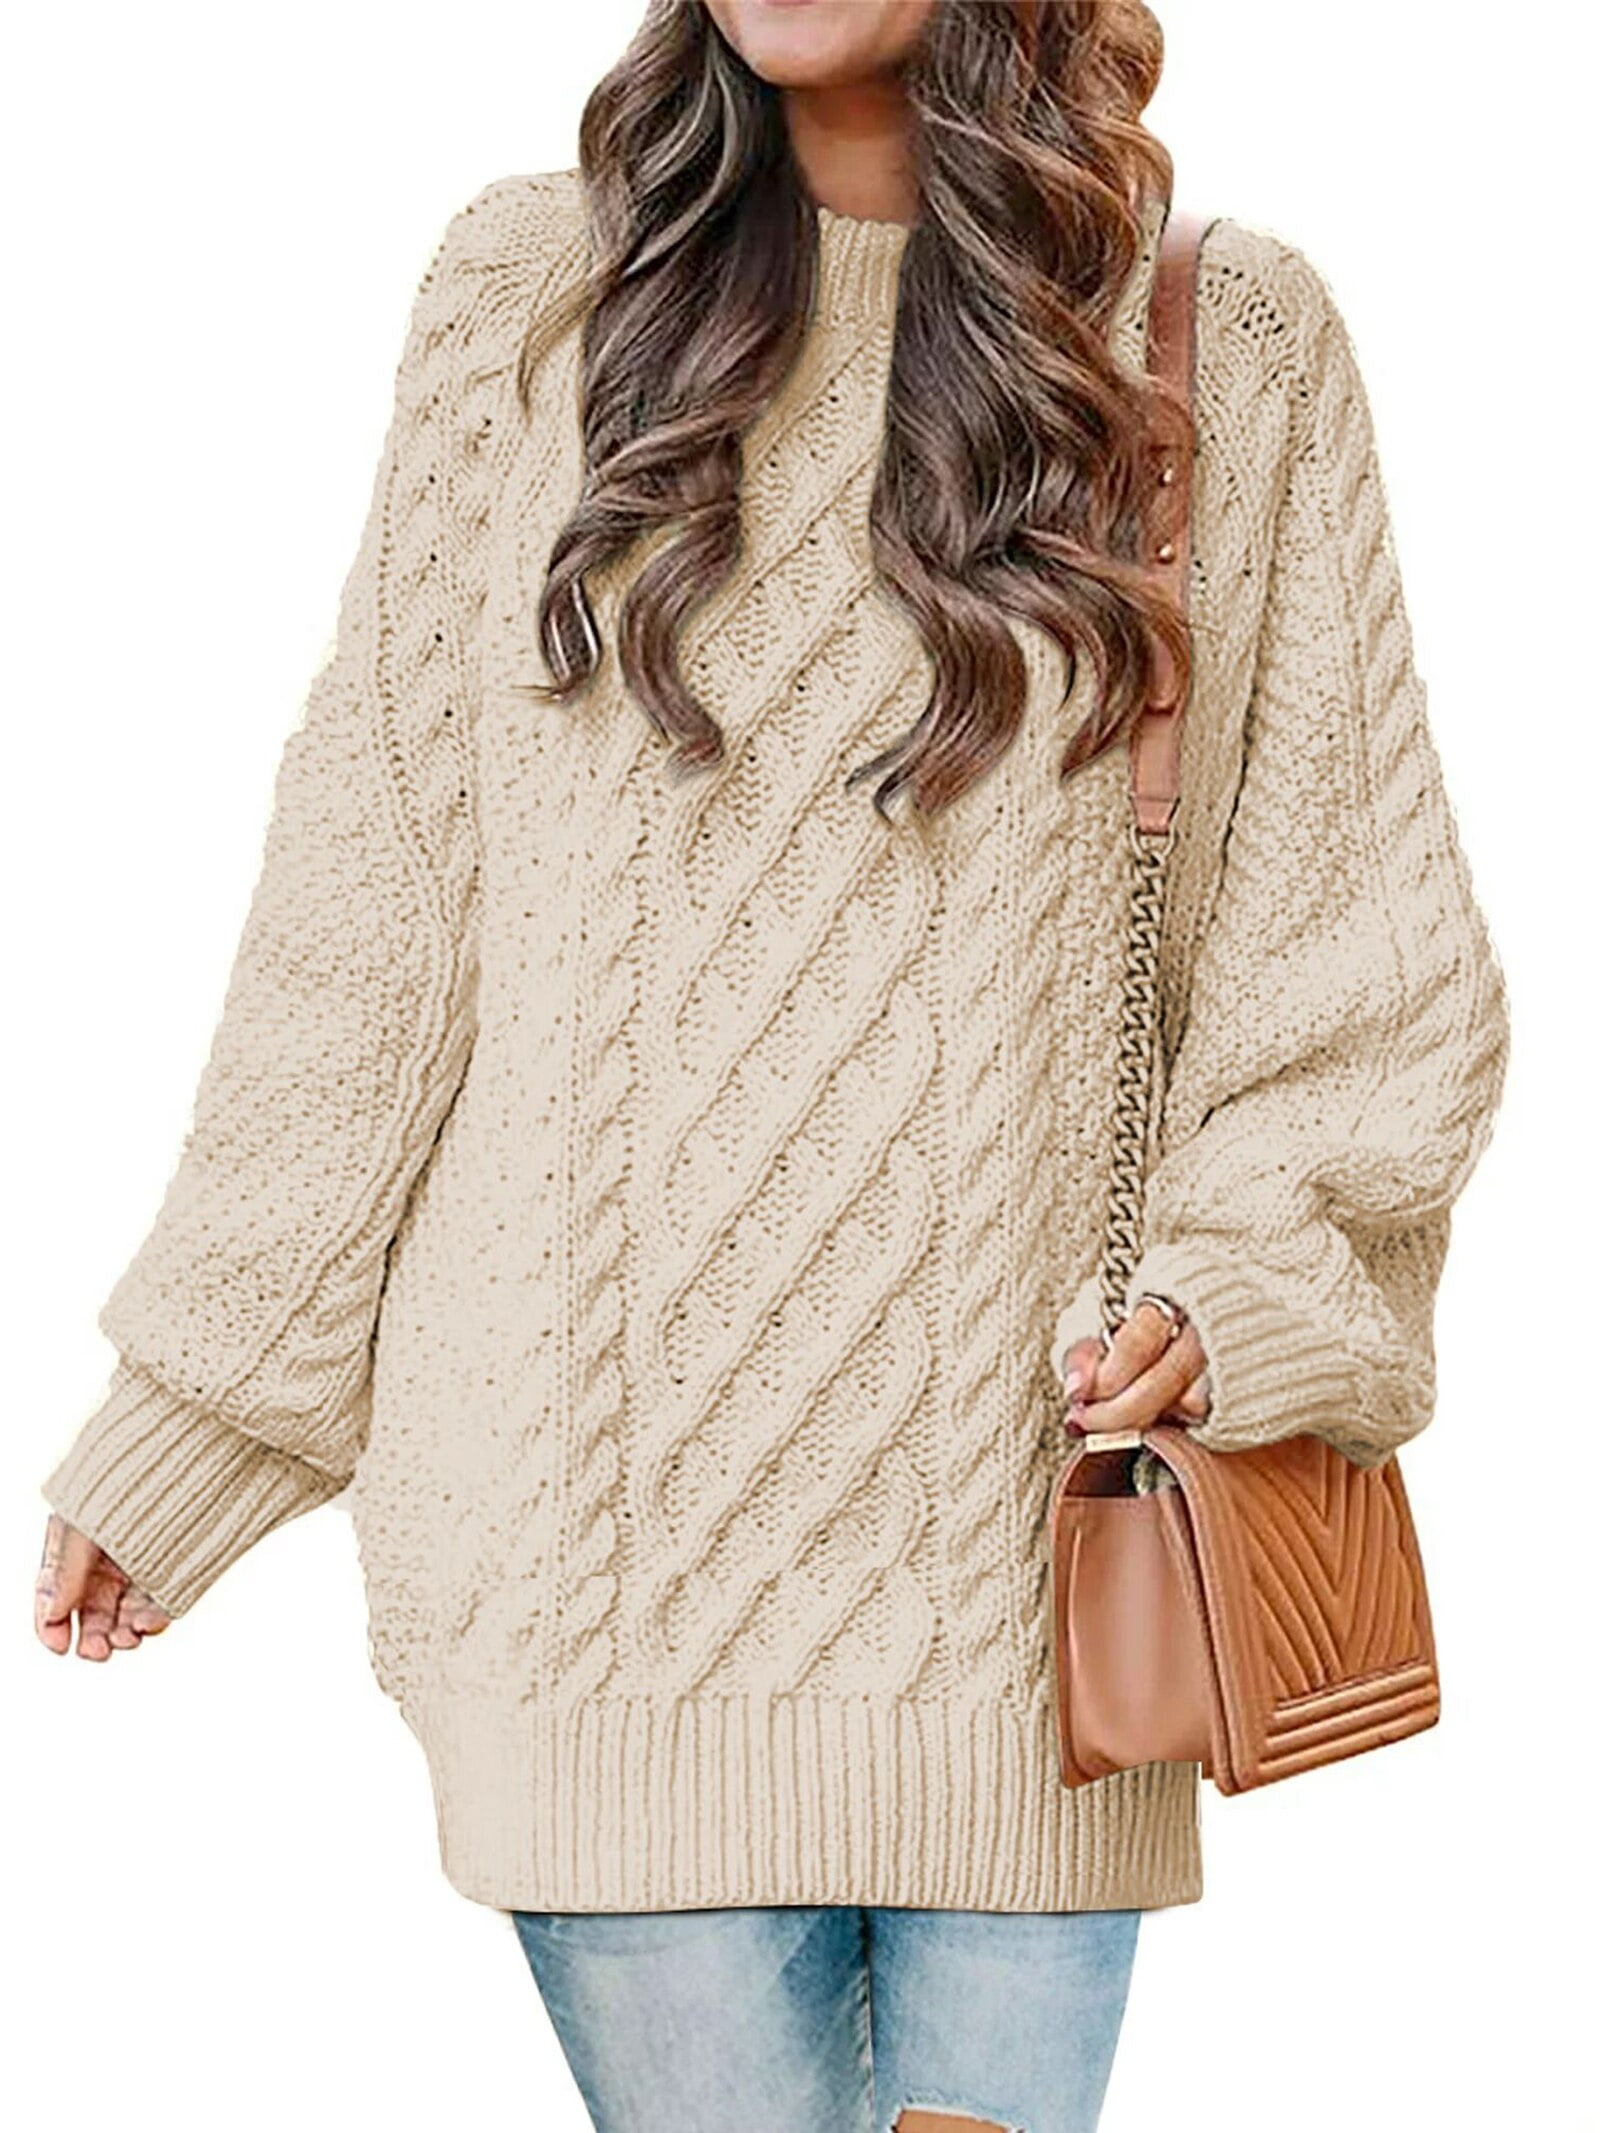 MOSHU Oversized Sweaters for Women Cable Knit Chunky Pullover Sweater ...